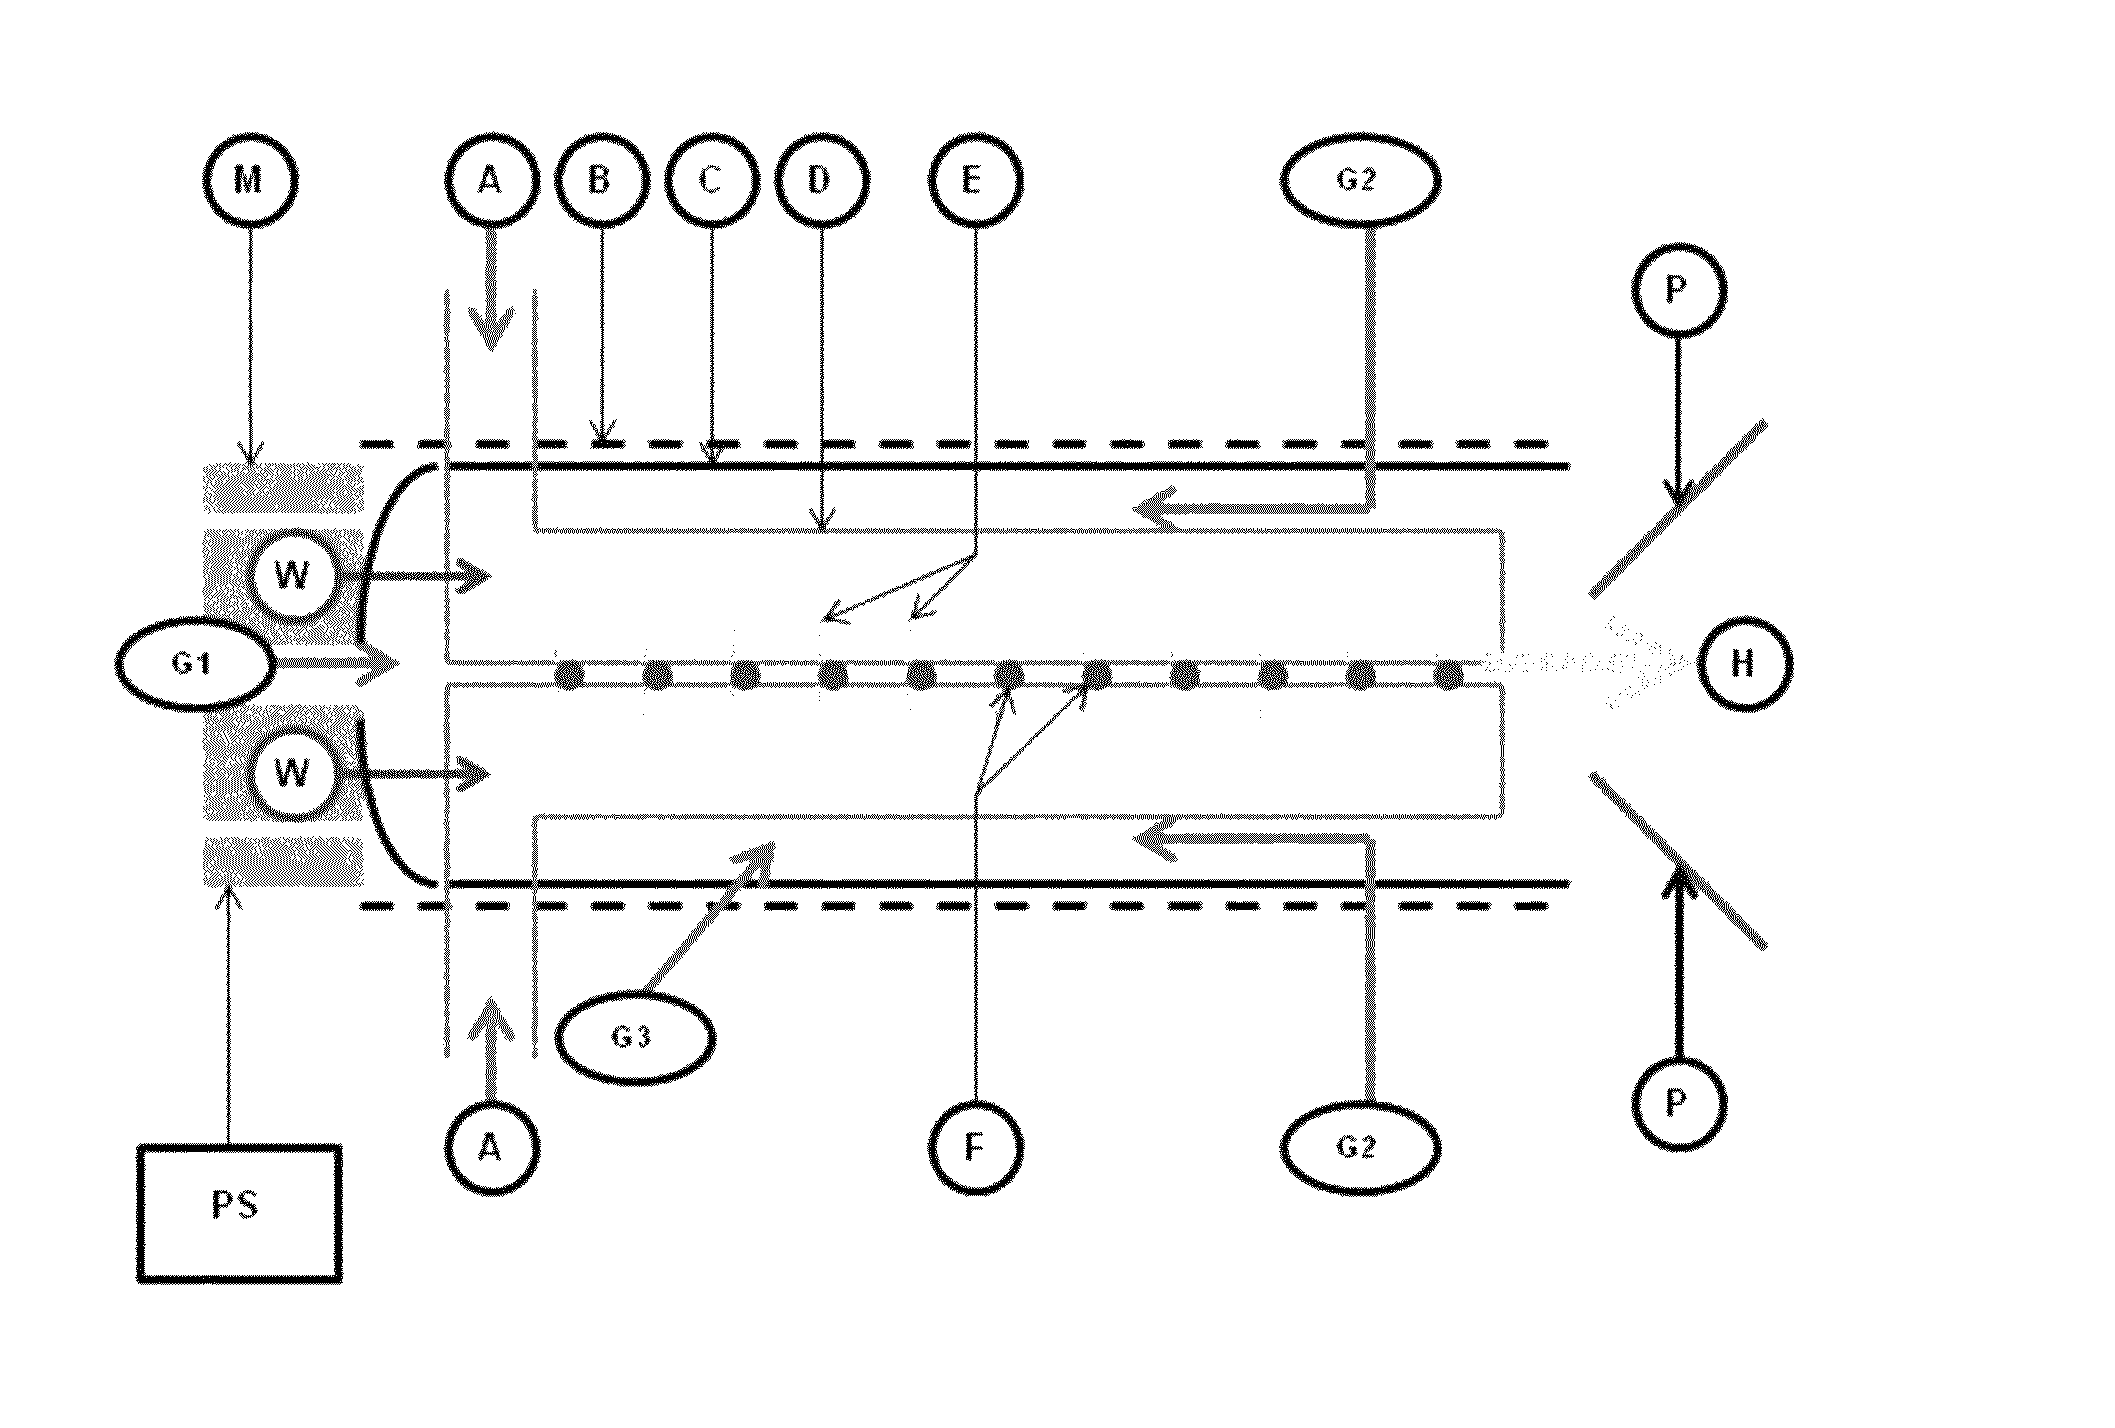 Integrated and modular approach for converting electrical power to ionic momentum and high differential voltage potential